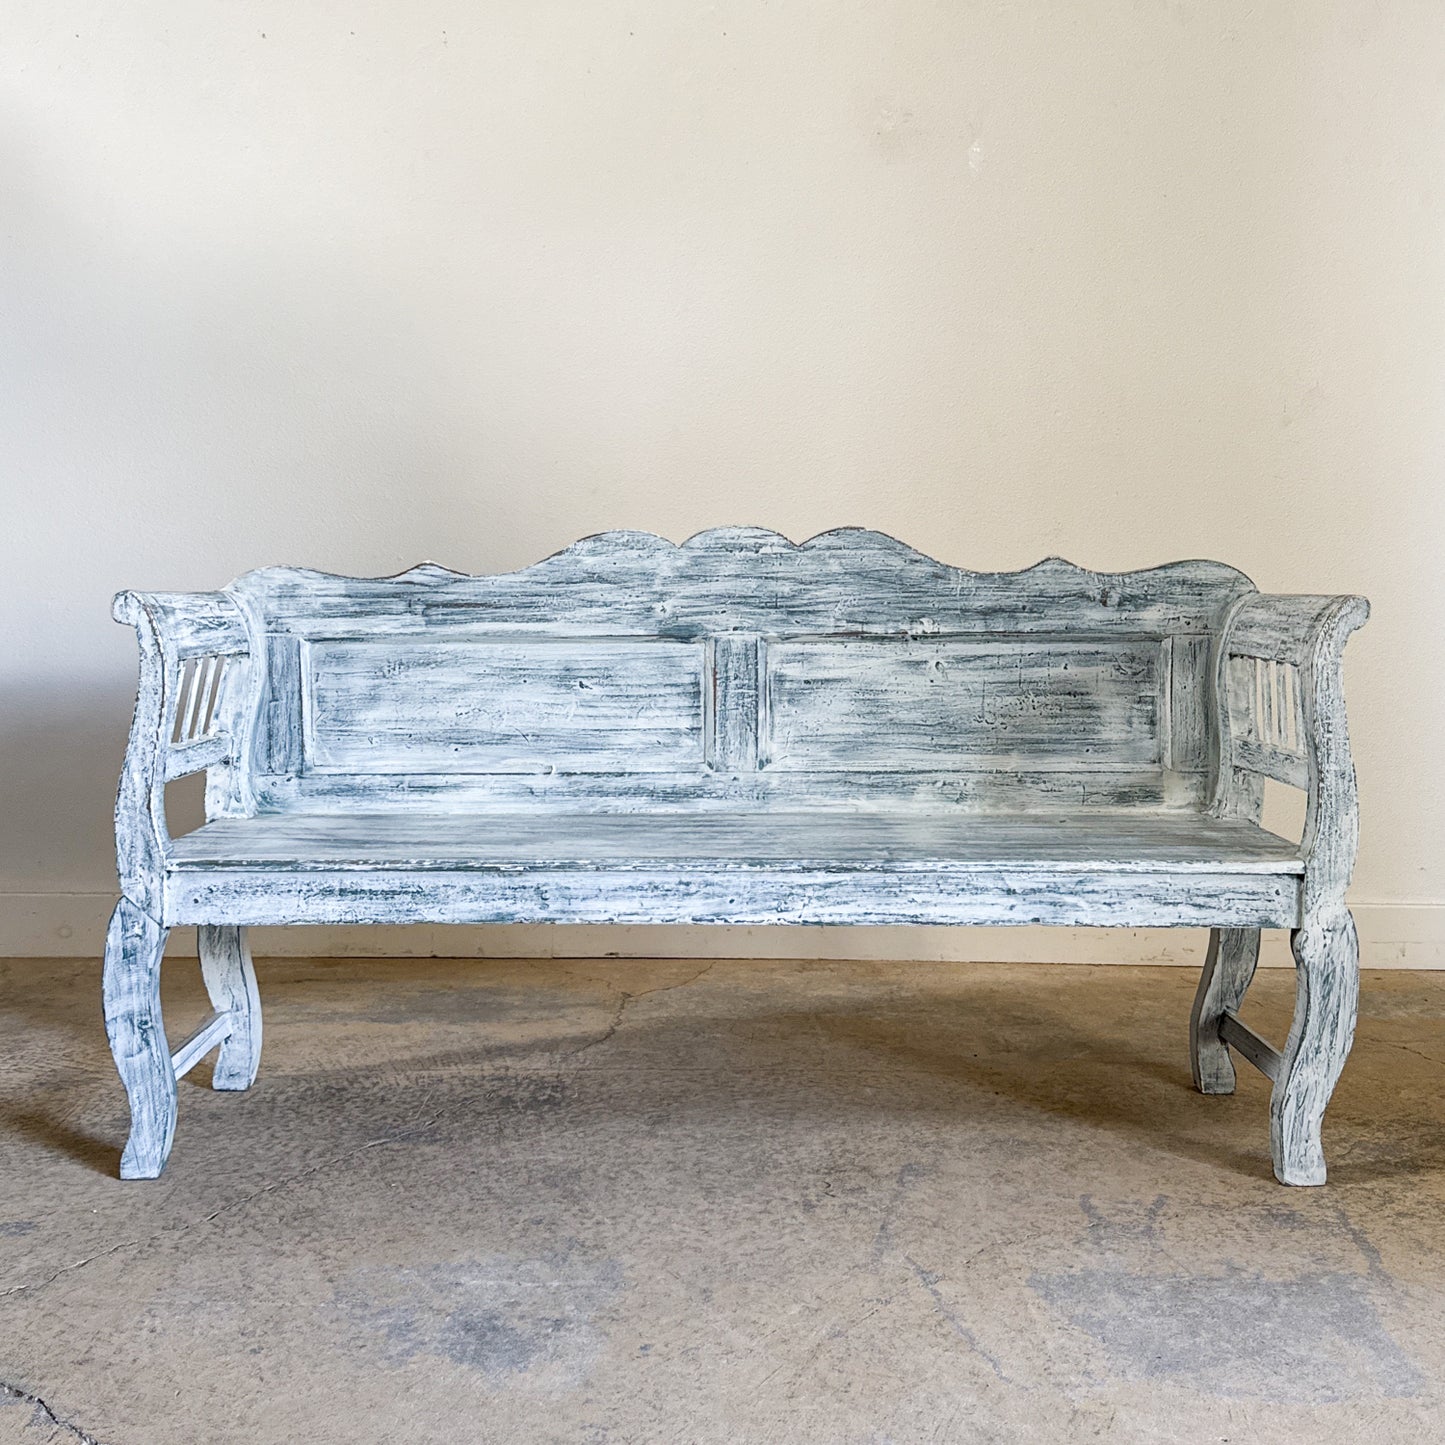 Painted European Bench